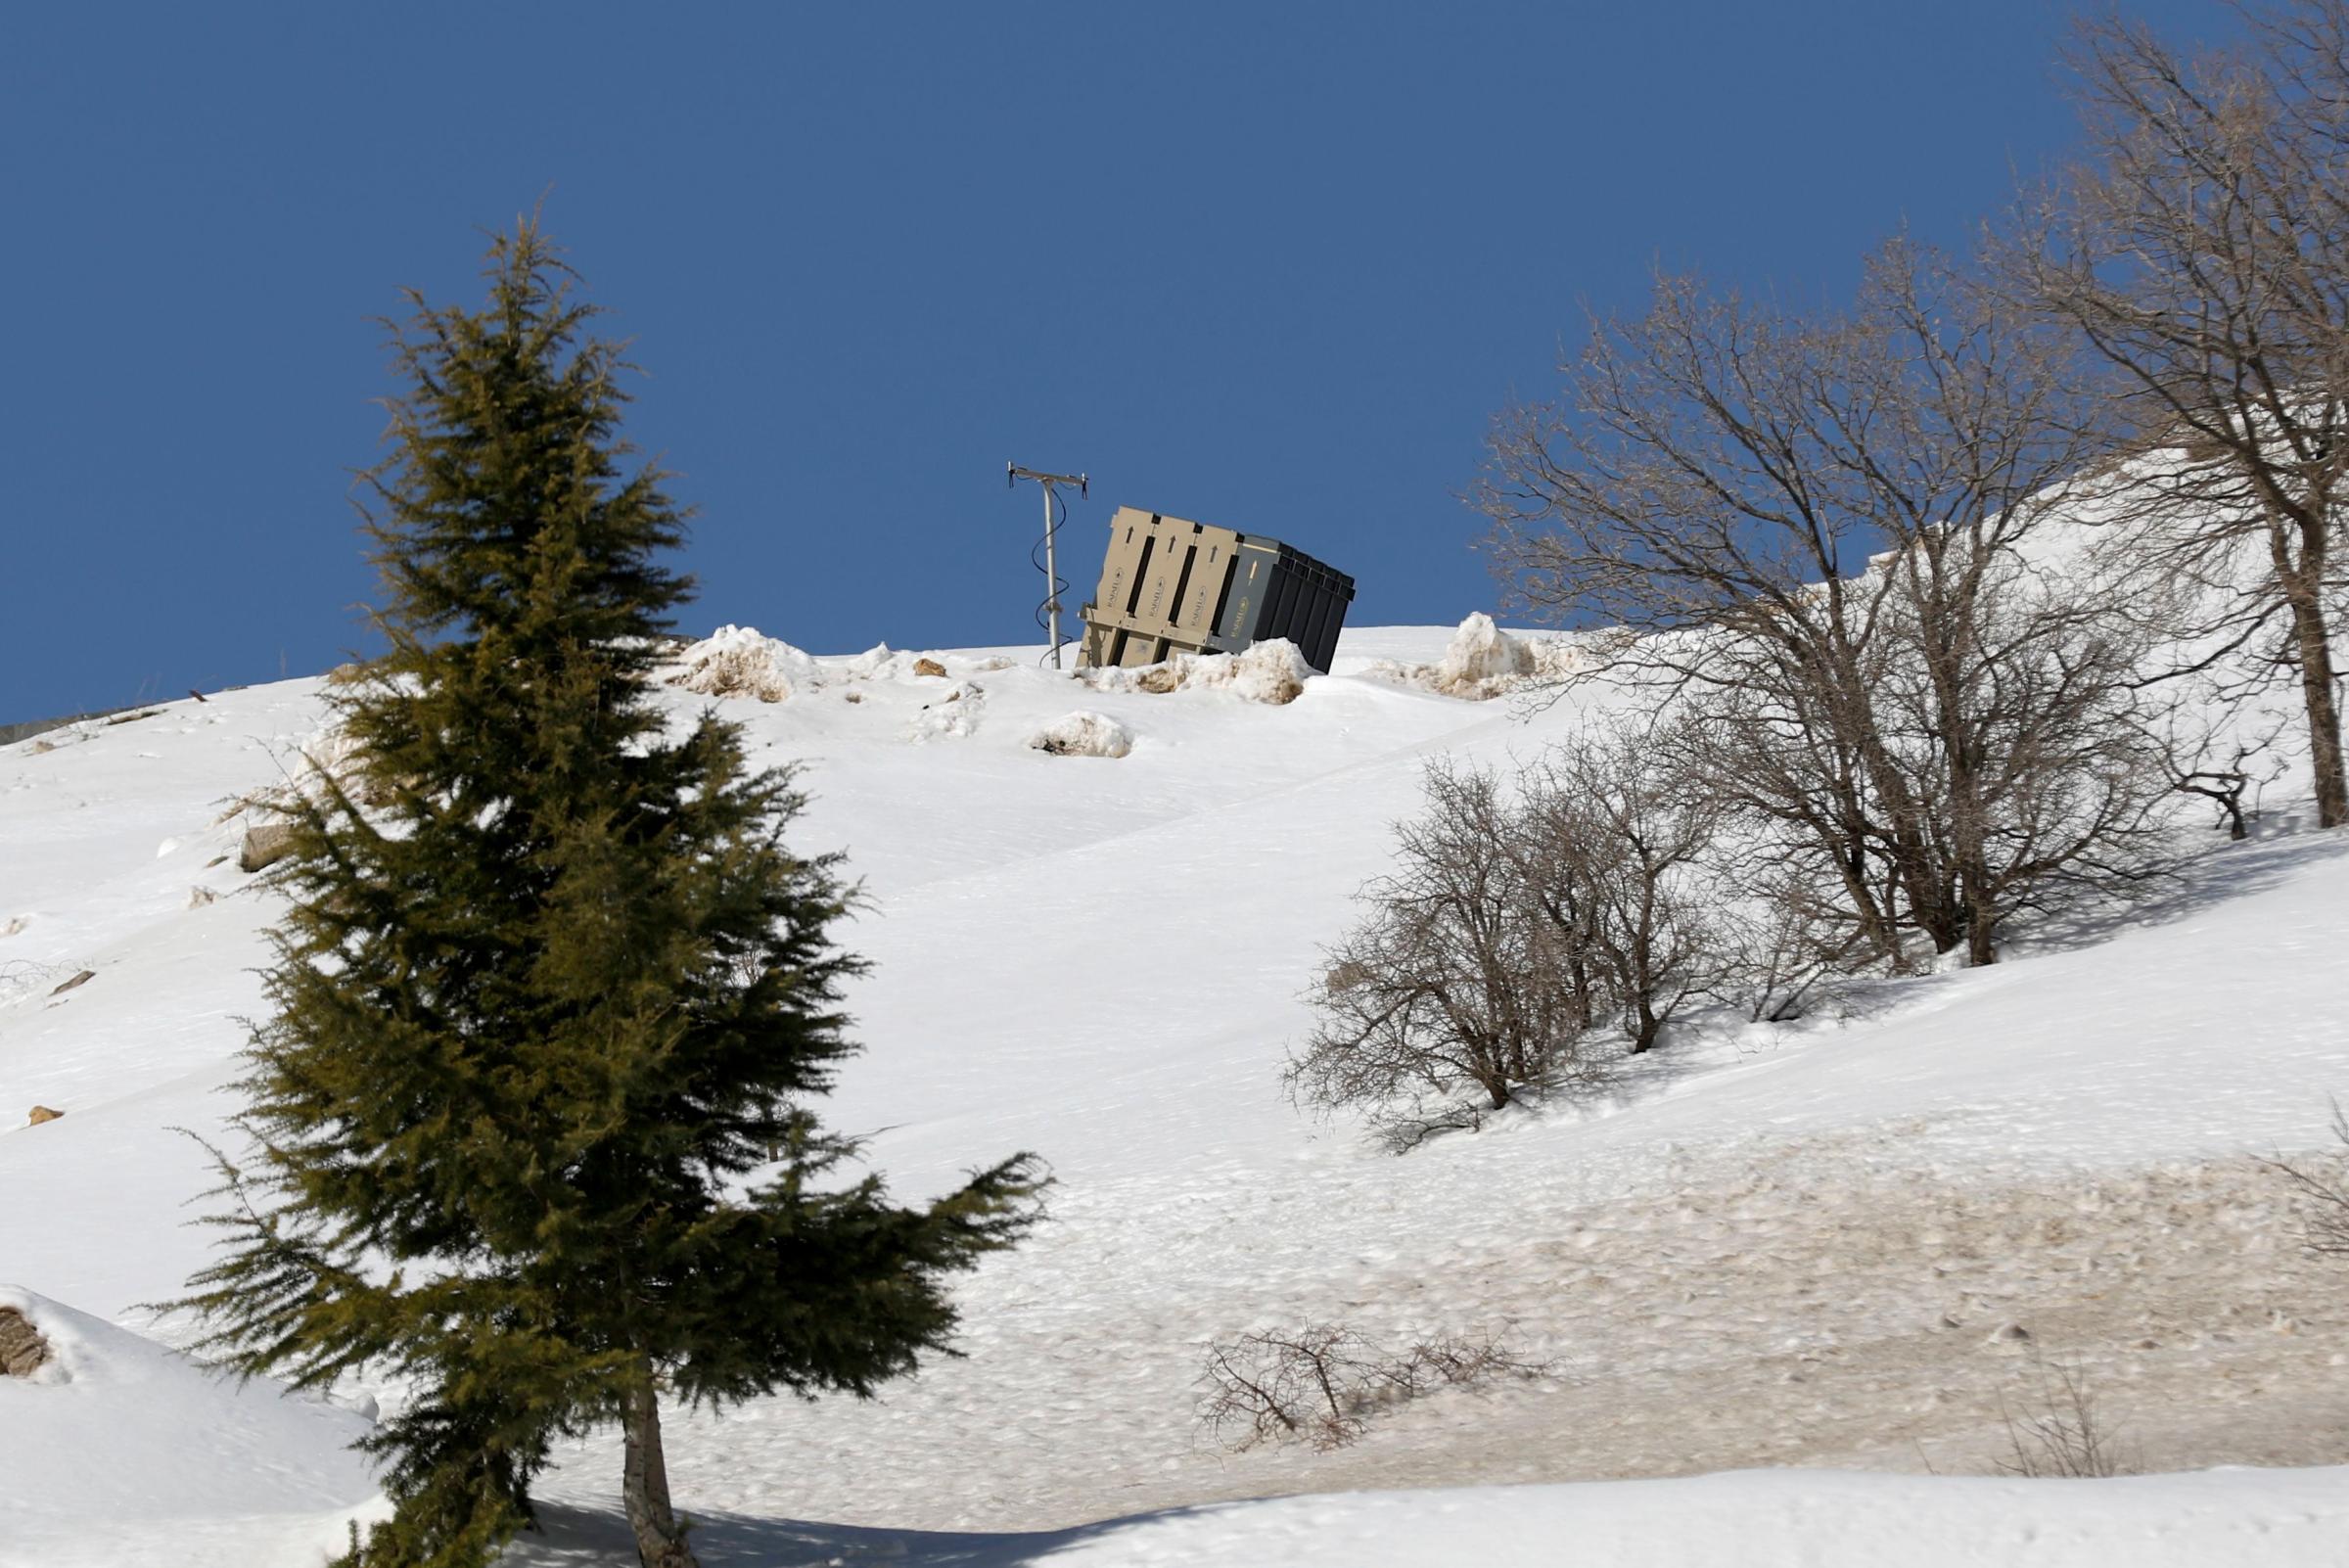 Israeli Iron dome aerial defense systems deployed near the Mount Hermon Resort, Israel